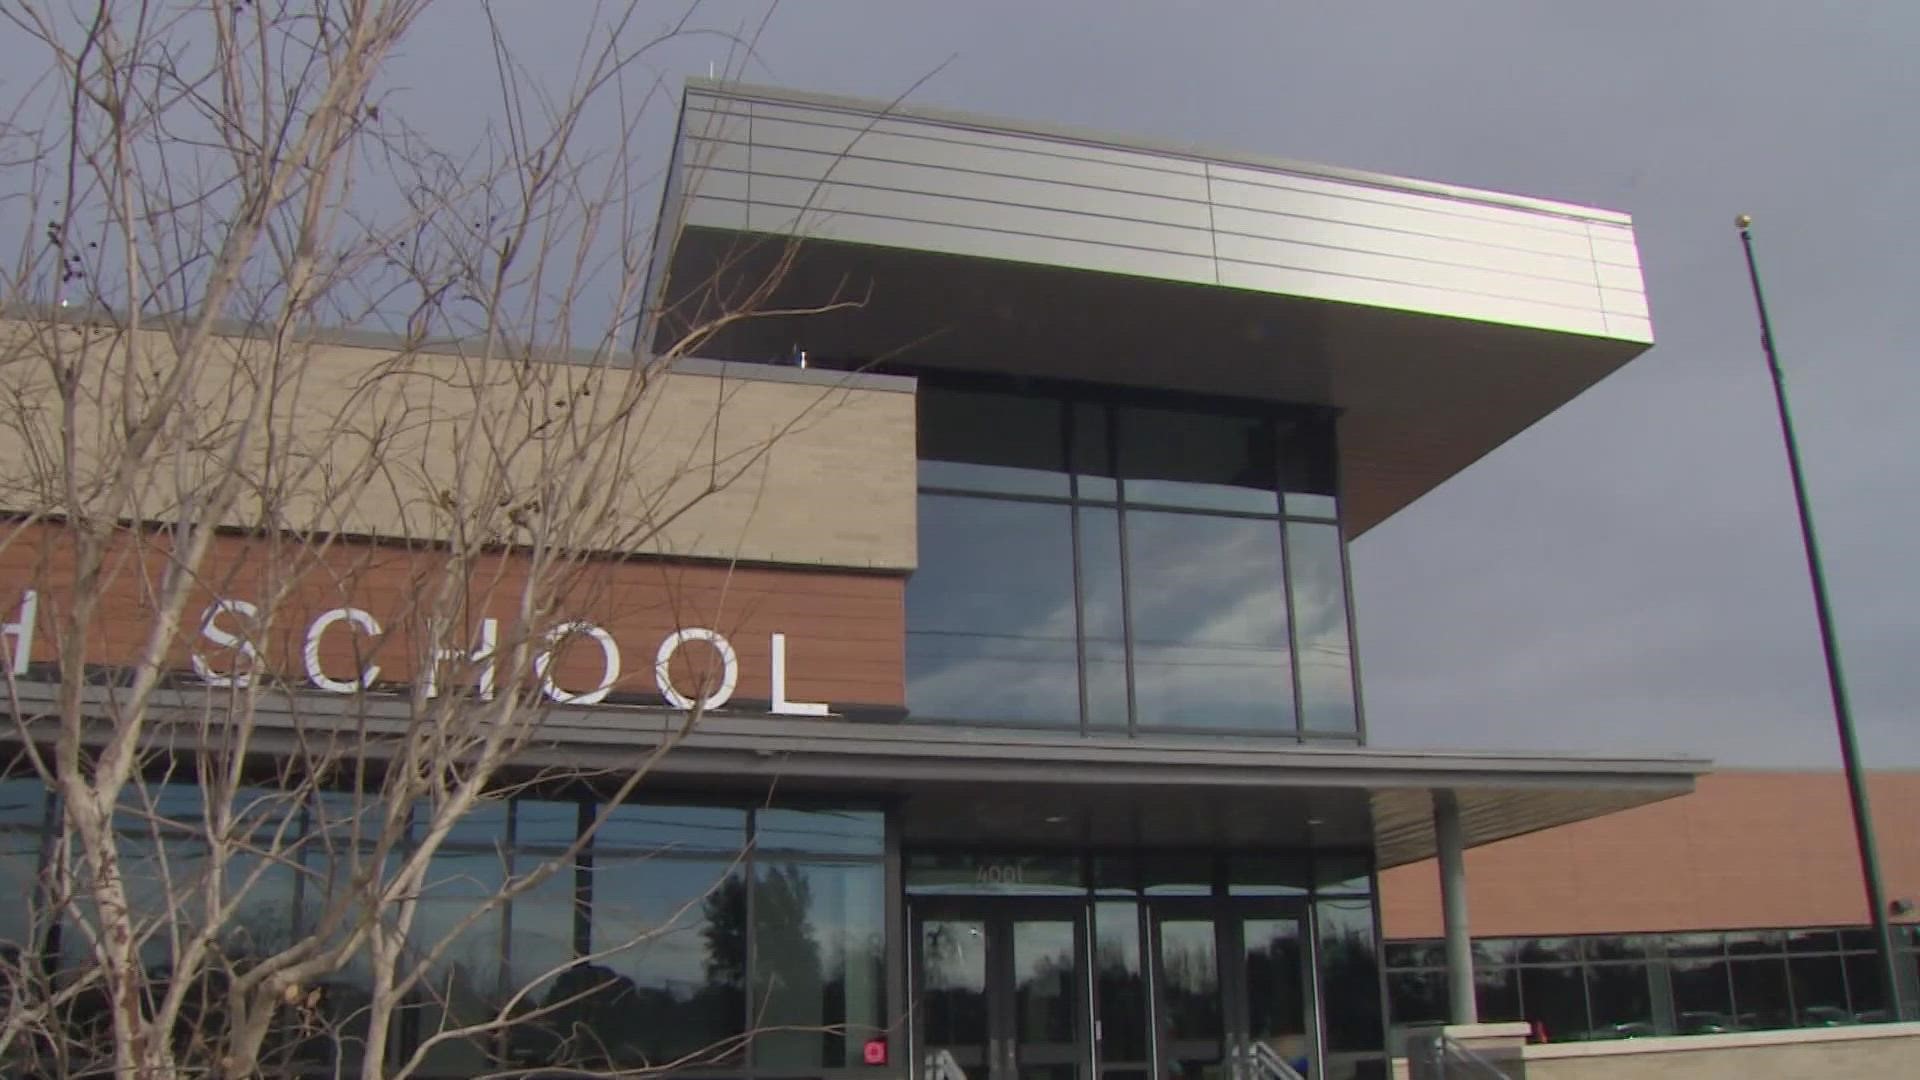 After being struck by an EF-3 tornado in 2019, Thomas Jefferson High School is finally ready to unveil its state-of-the-art upgrades and facilities.